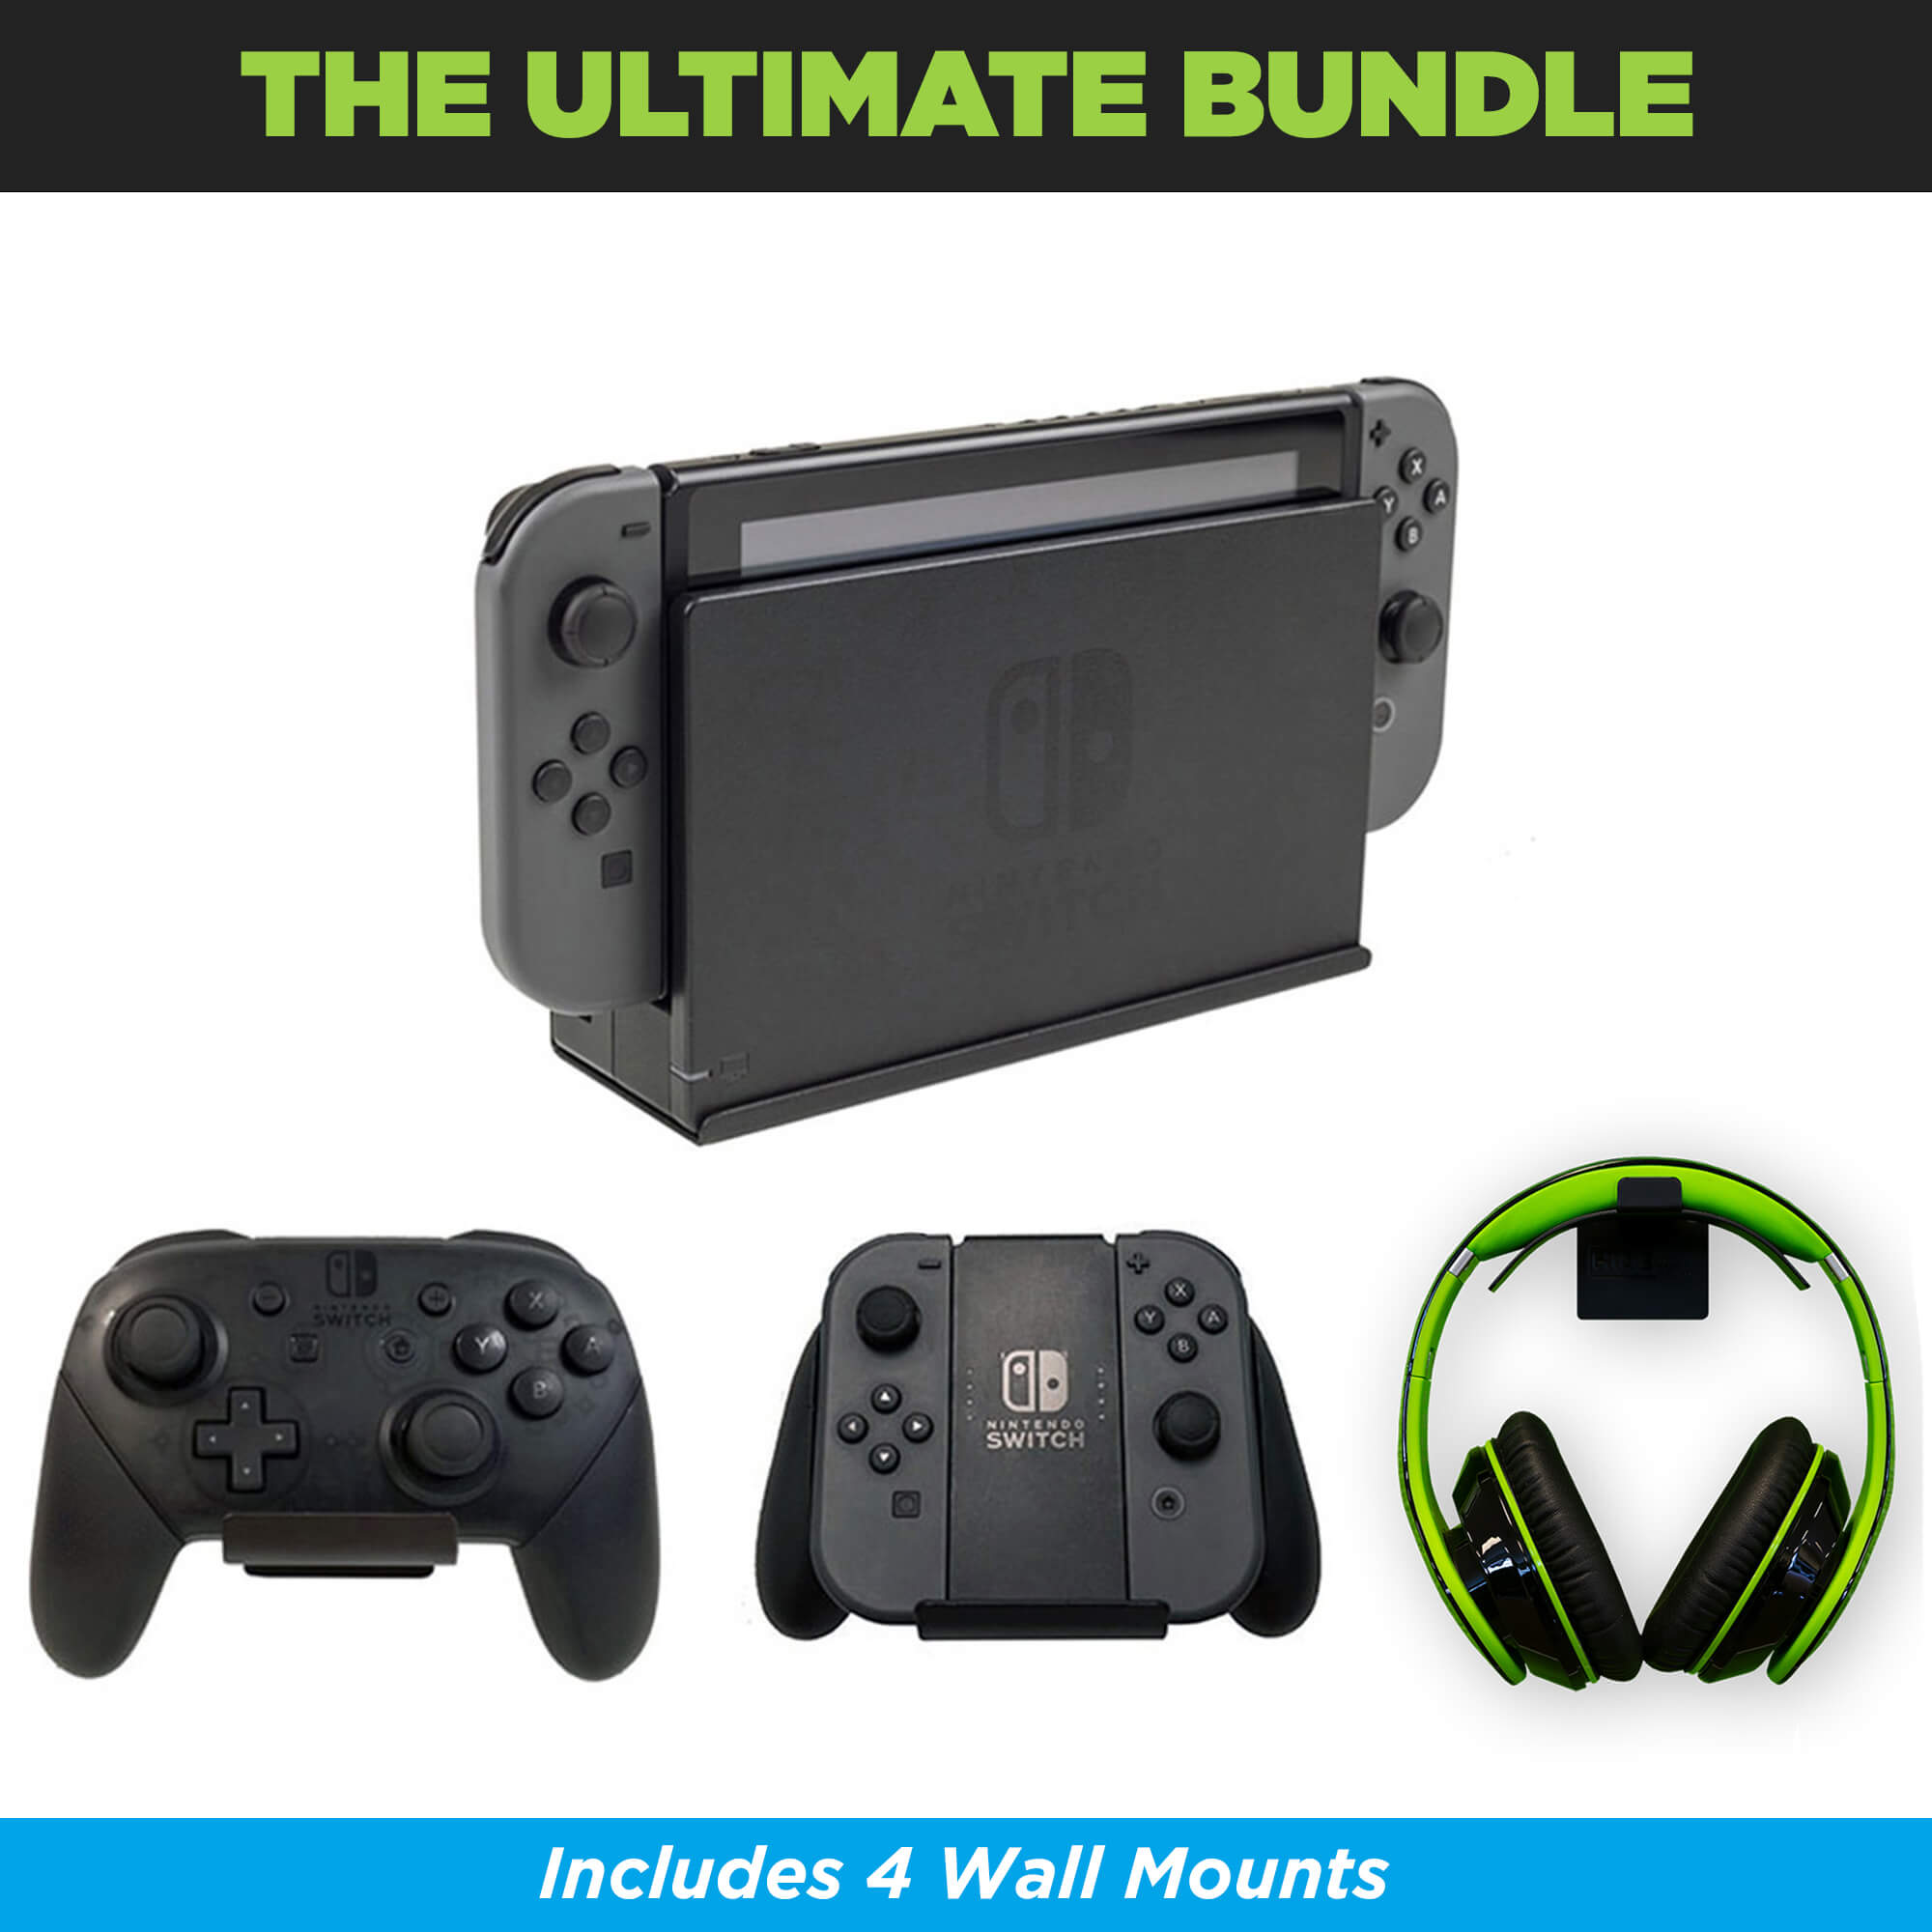 The Ultimate Nintendo Switch Dock Wall Mount Bundle. Comes with HIDEit Switch Wall Mount, 2 JoyCon Controller Mounts and 1 headset wall mount.